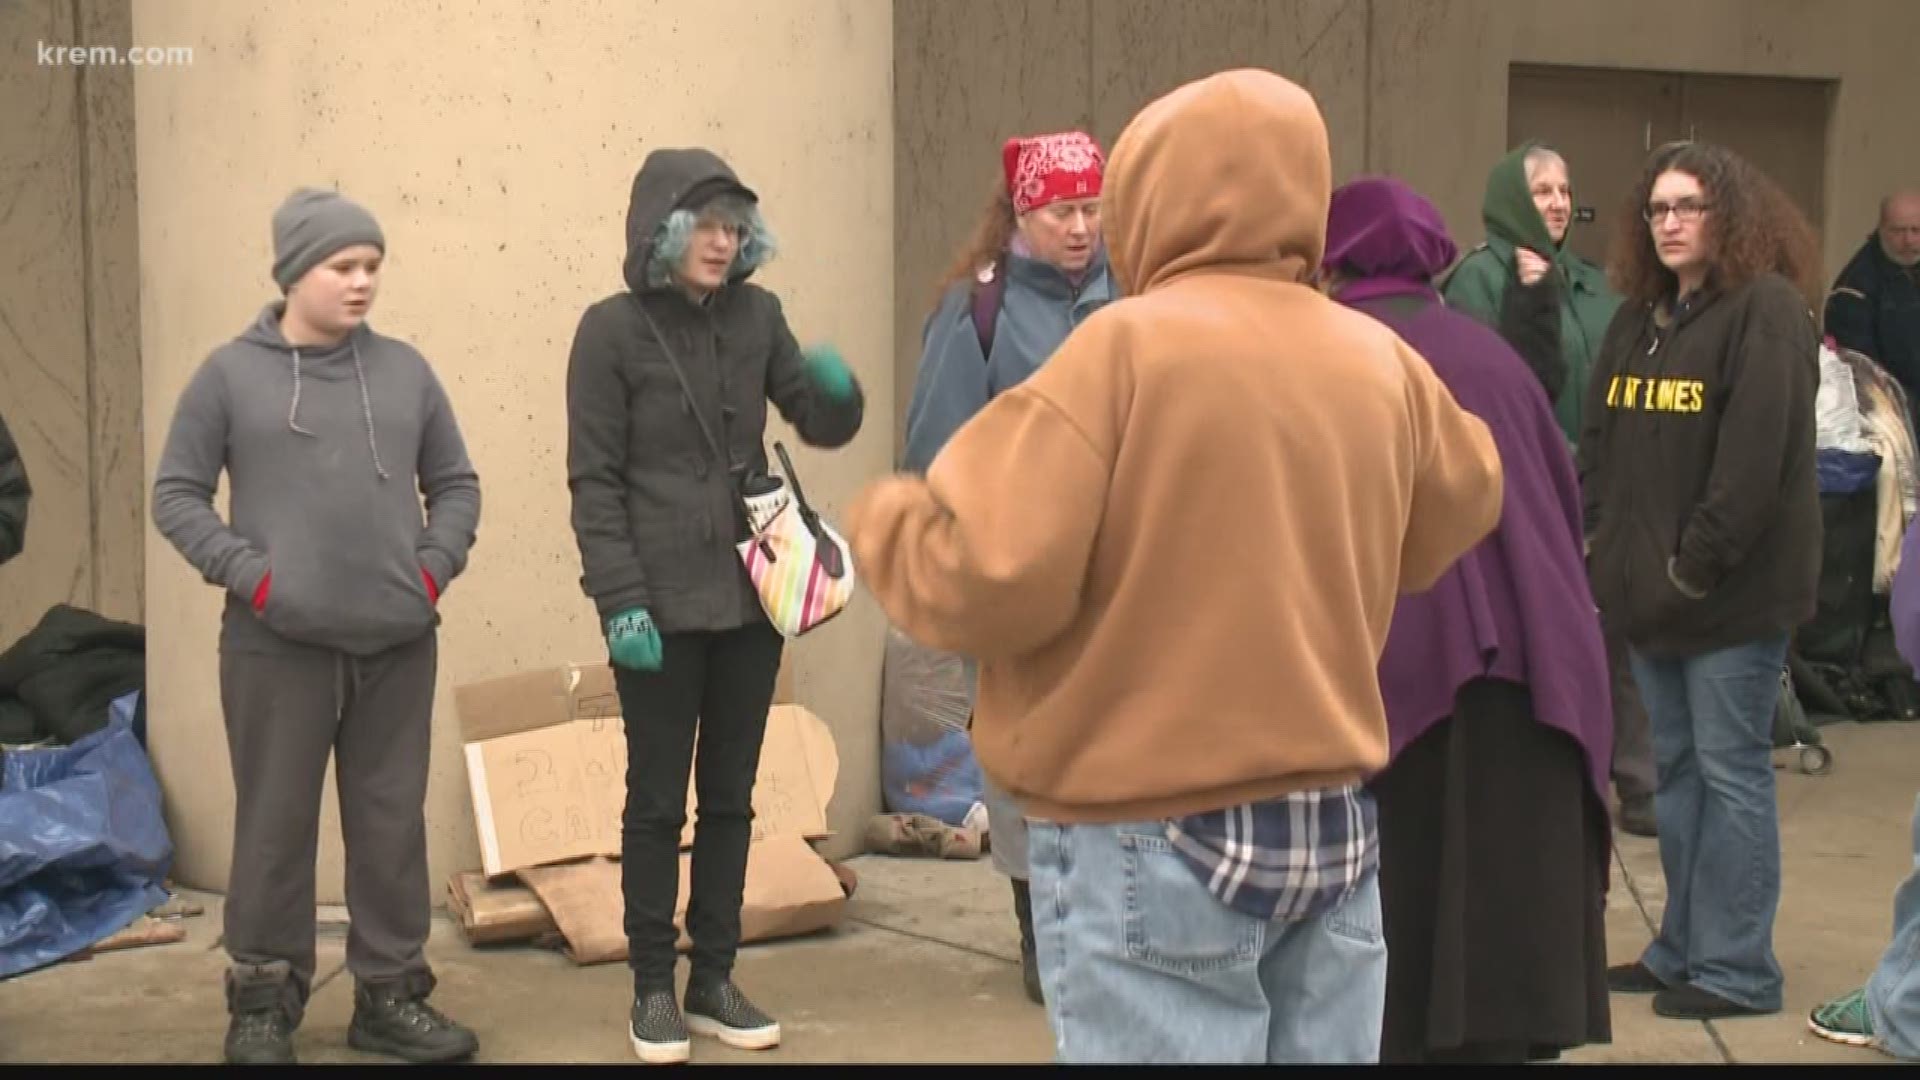 Demonstrators formed a wall around homeless residents' belongings at Spokane City Hall on Monday morning. The demonstrators say police planned to remove the belongings.